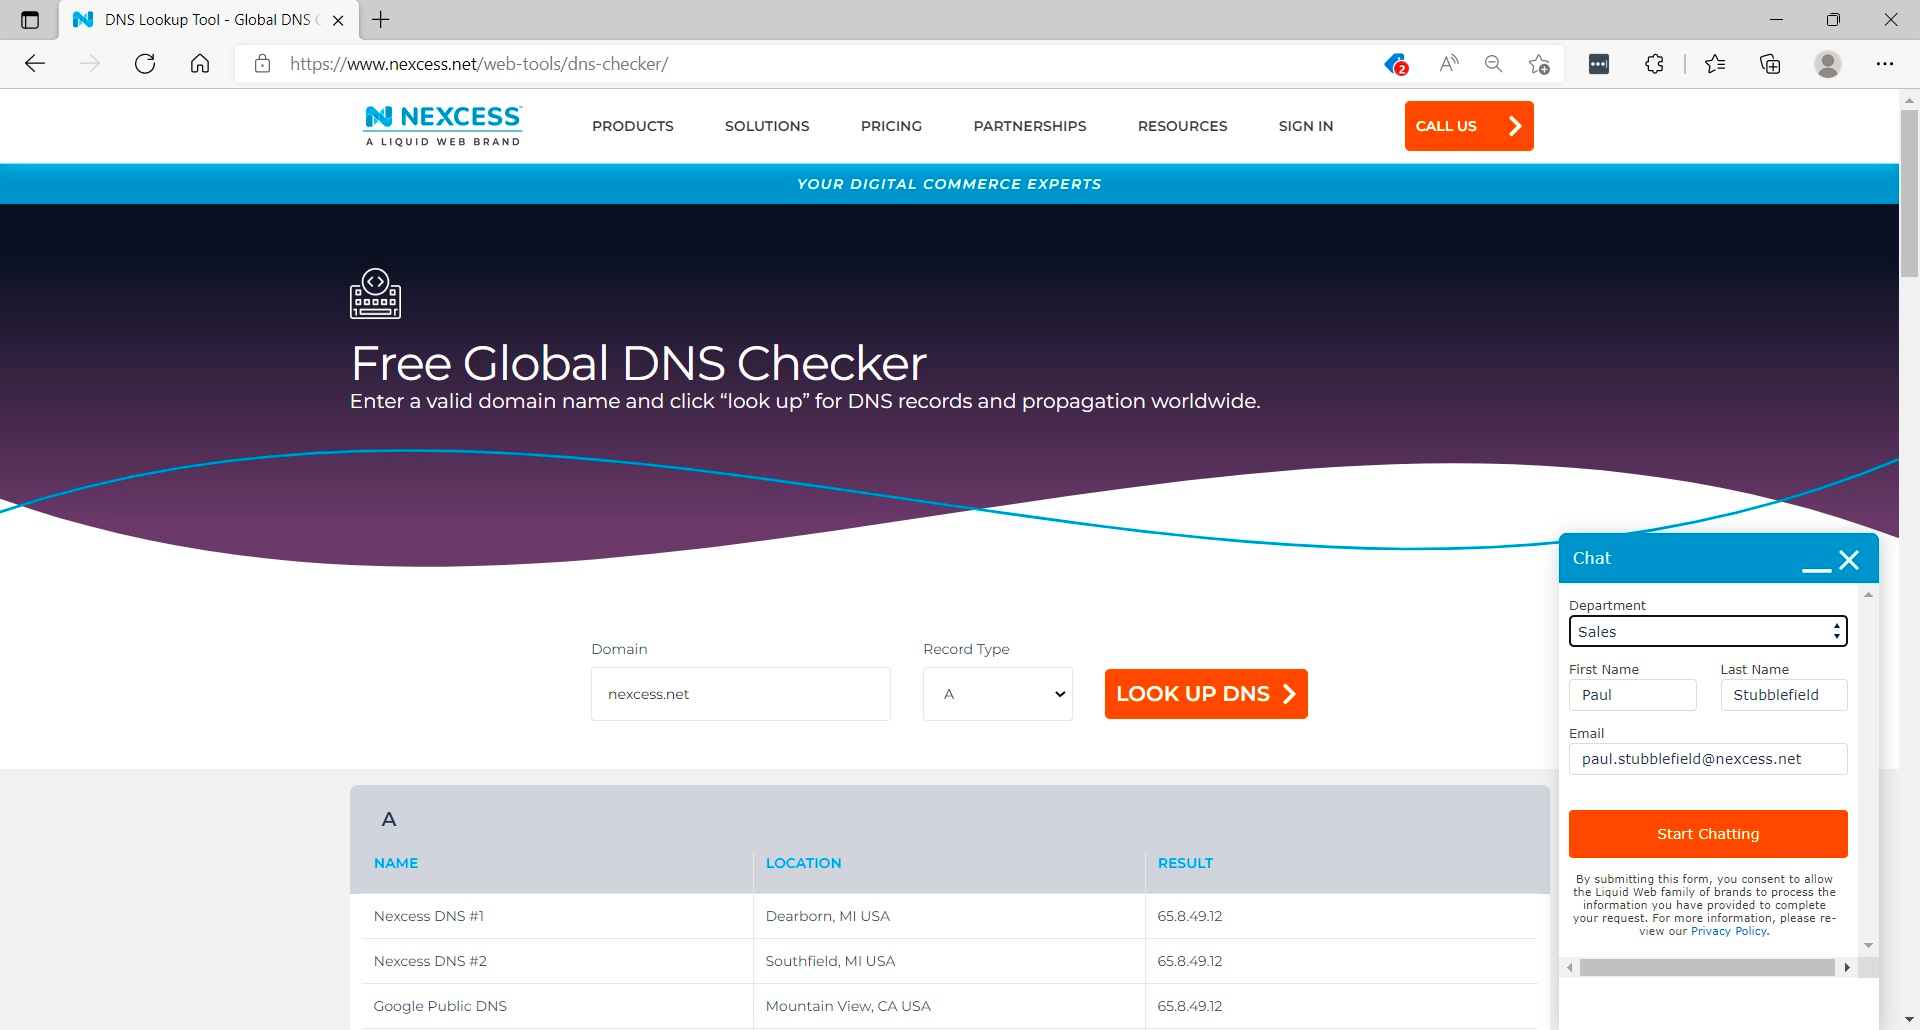 If you want to learn how to find a domain or website IP address, use our DNS checker tool